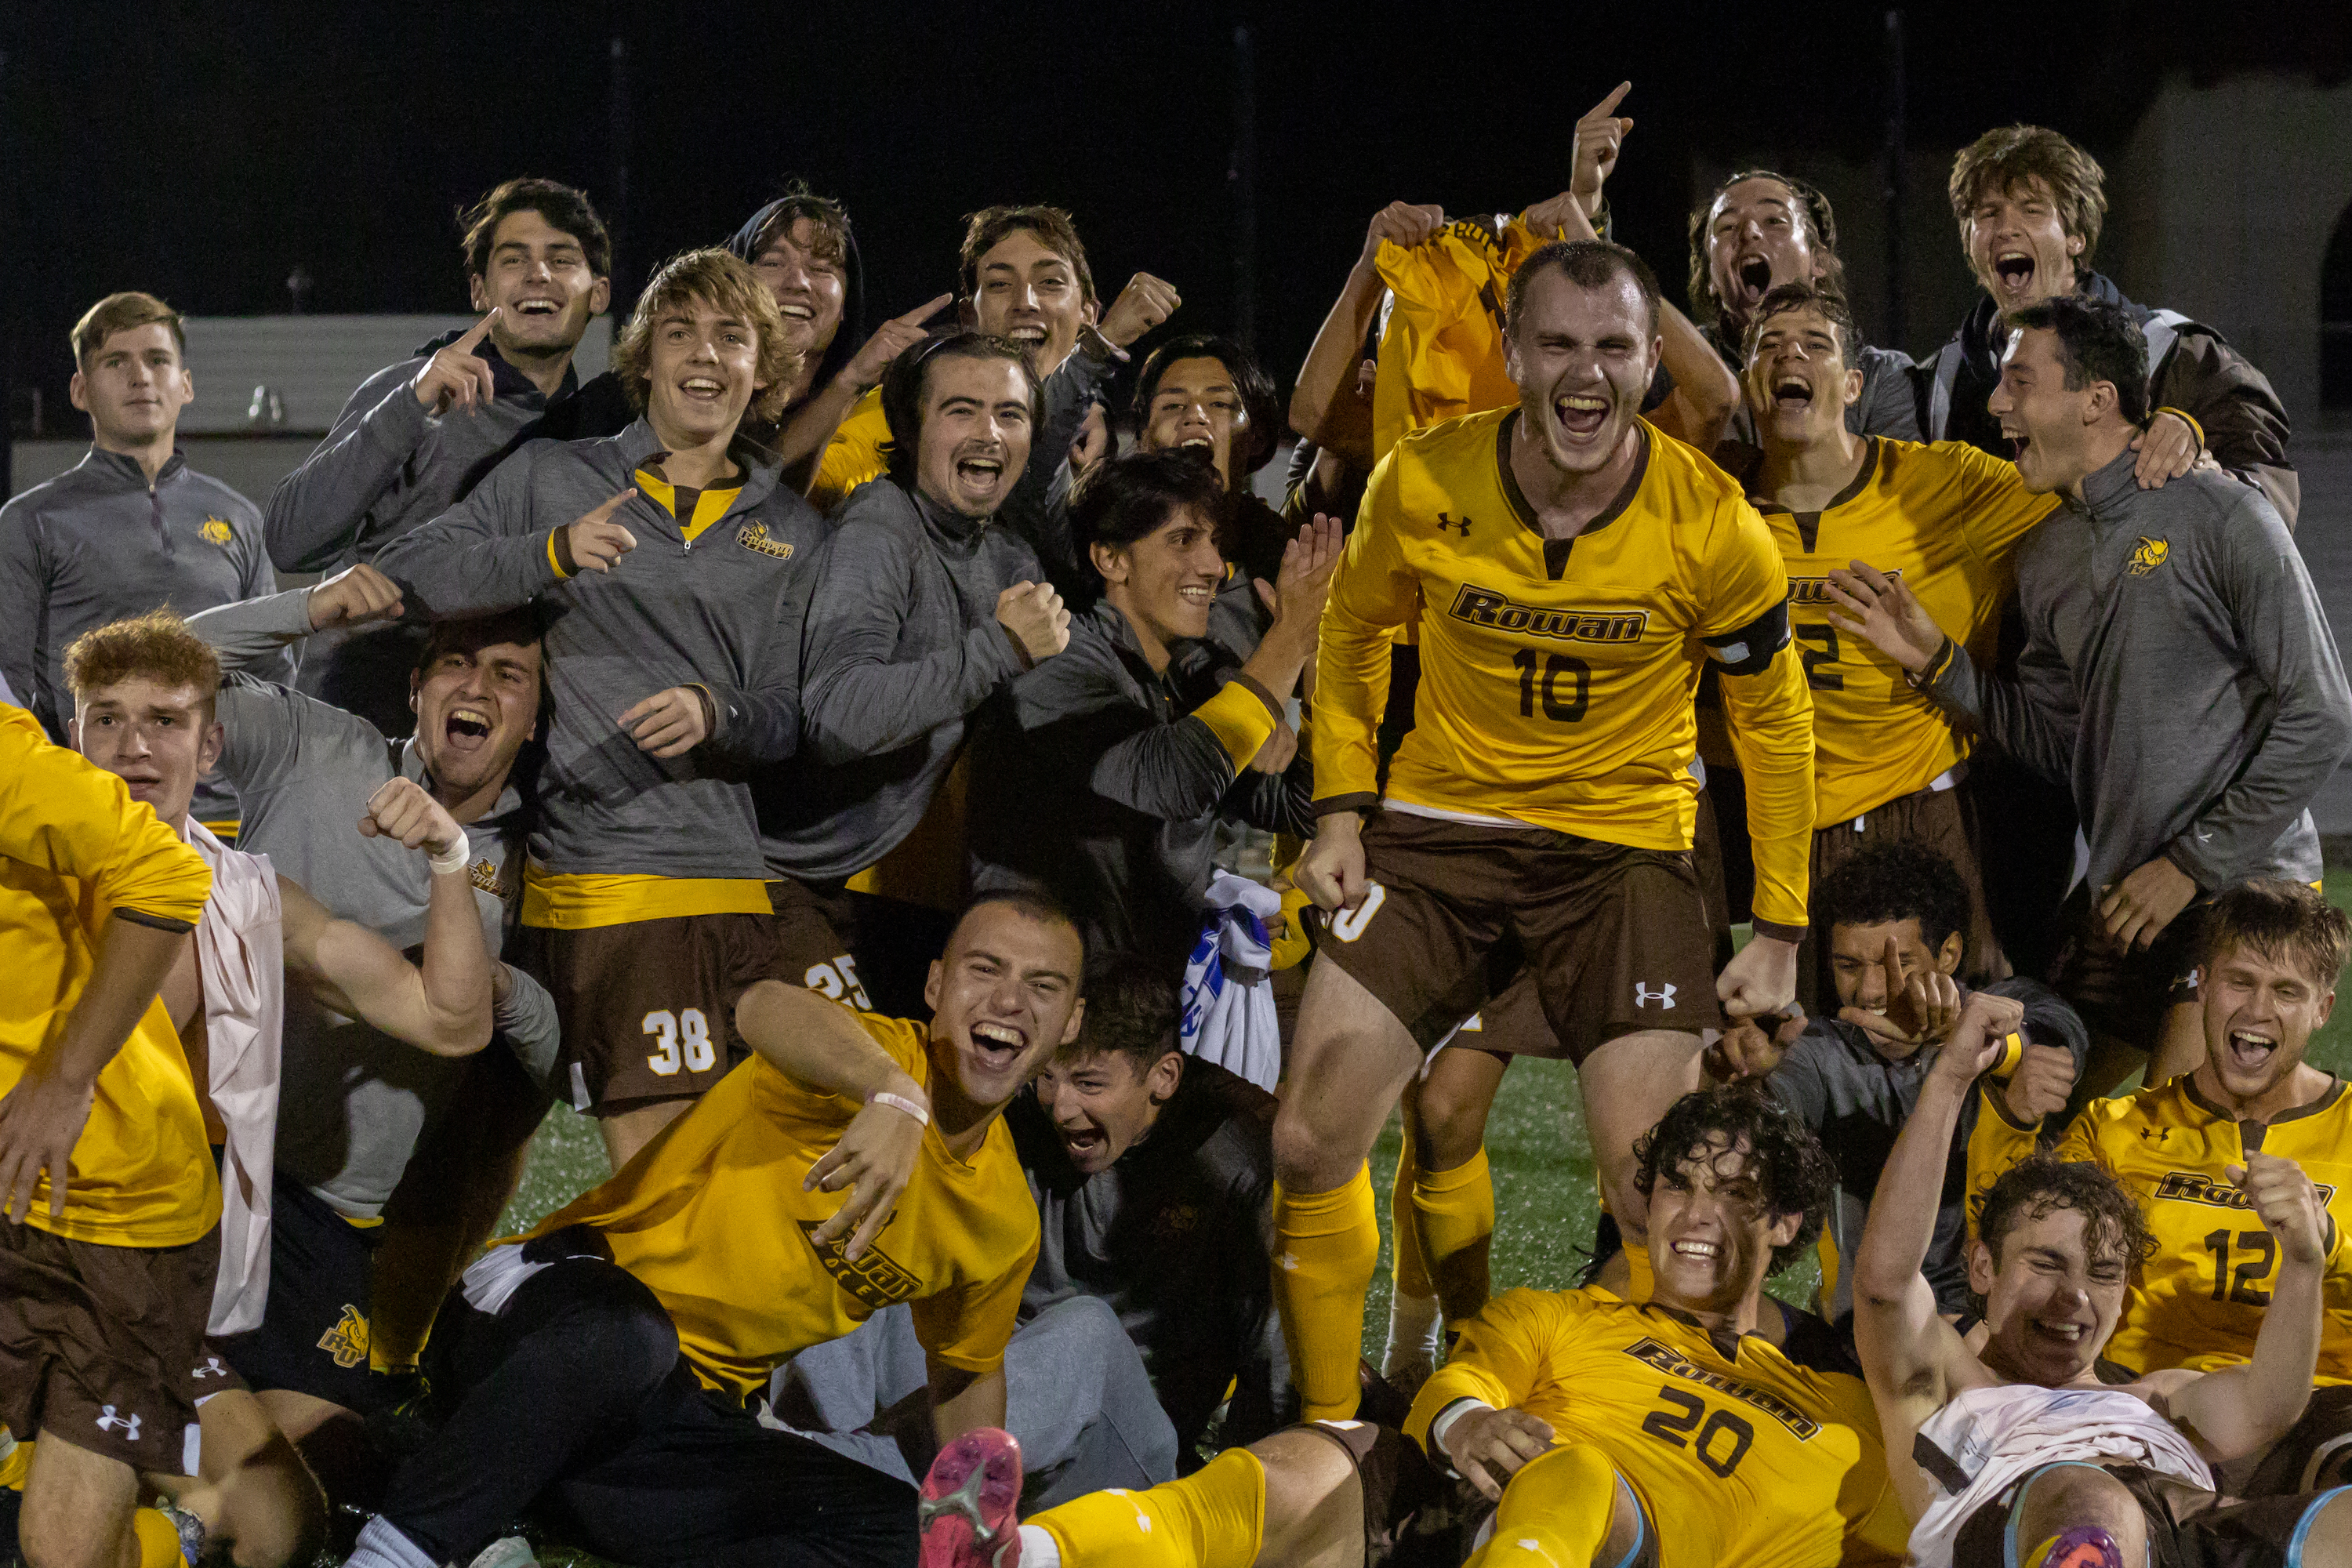 Rowan Athletics Wins NJAC Cup for Fourth Time in Five Years of